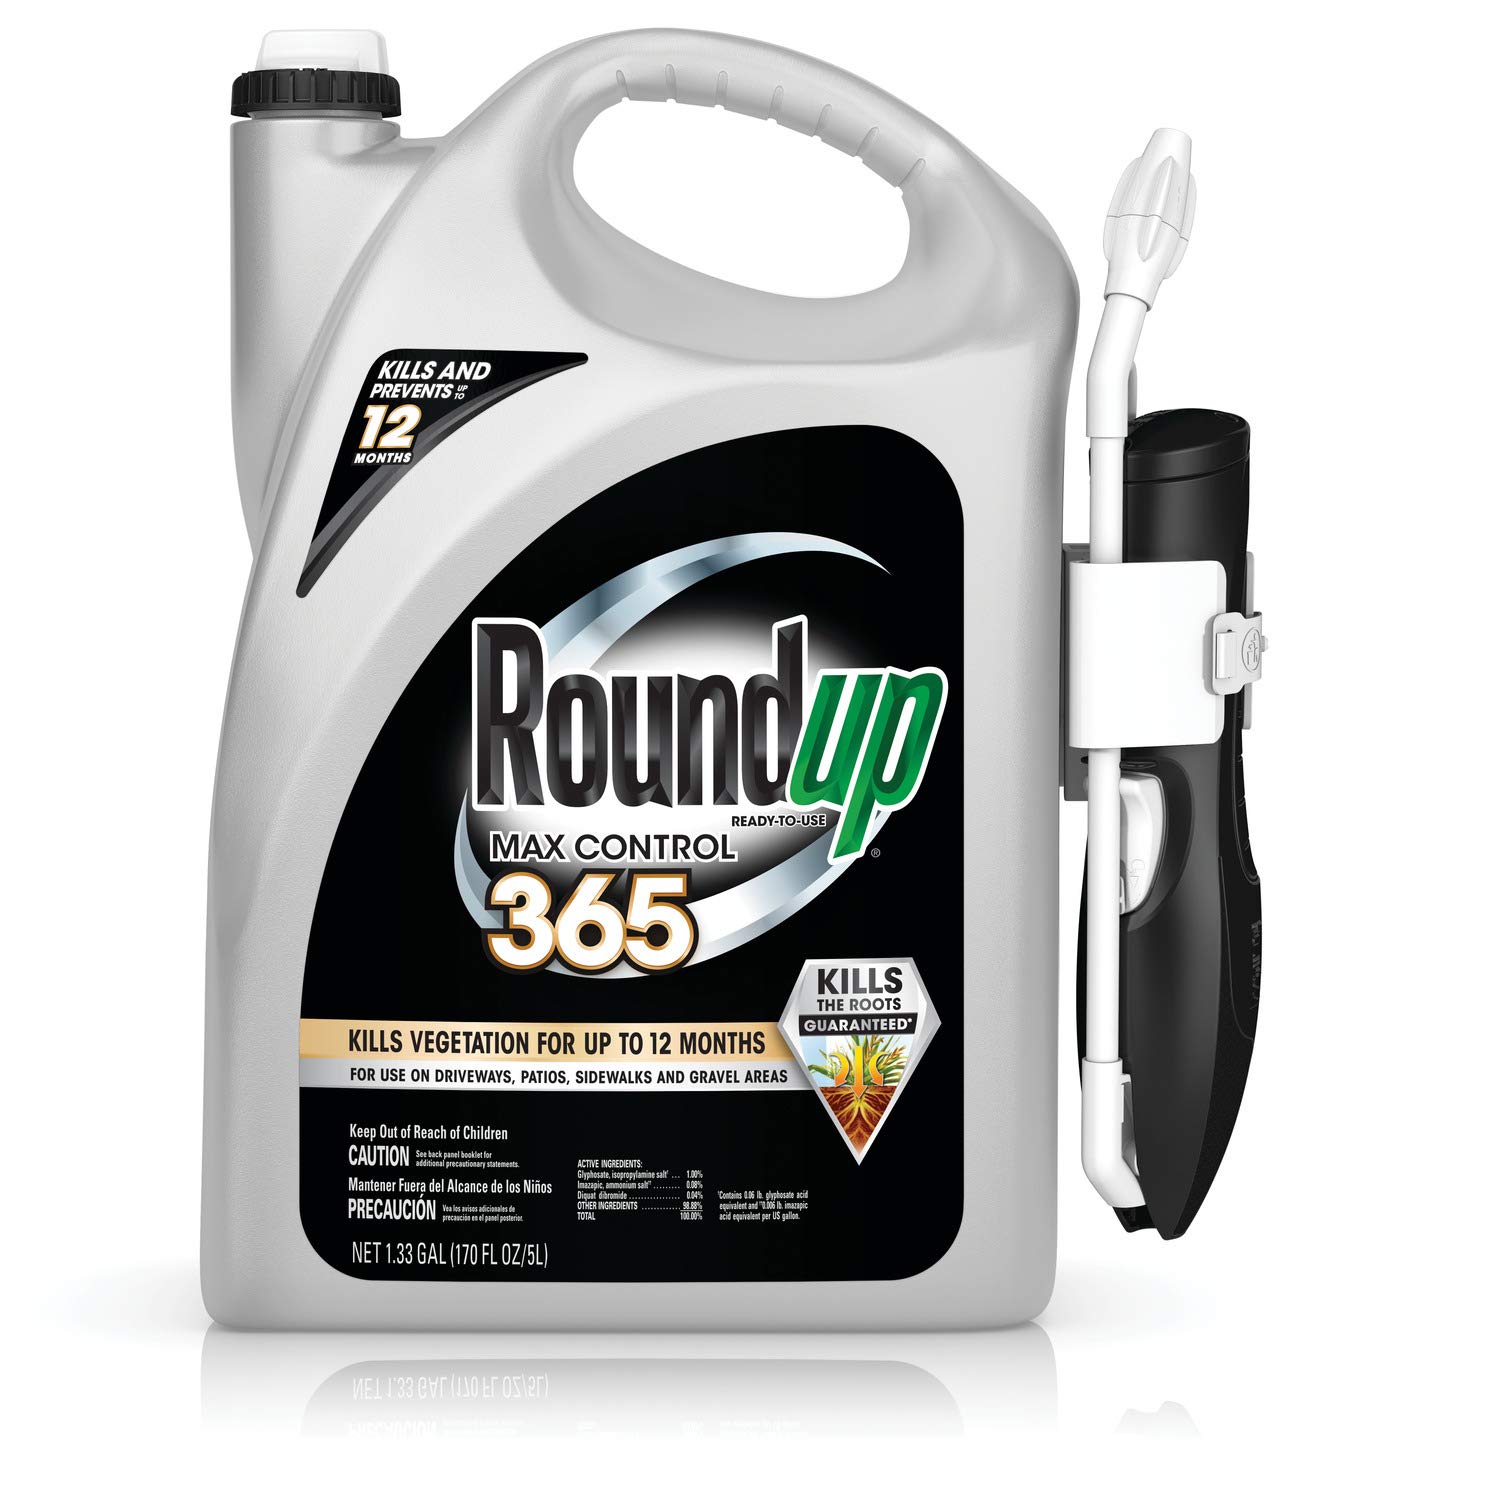 Roundup Ready-To-Use Max Control 365 with Comfort Wand